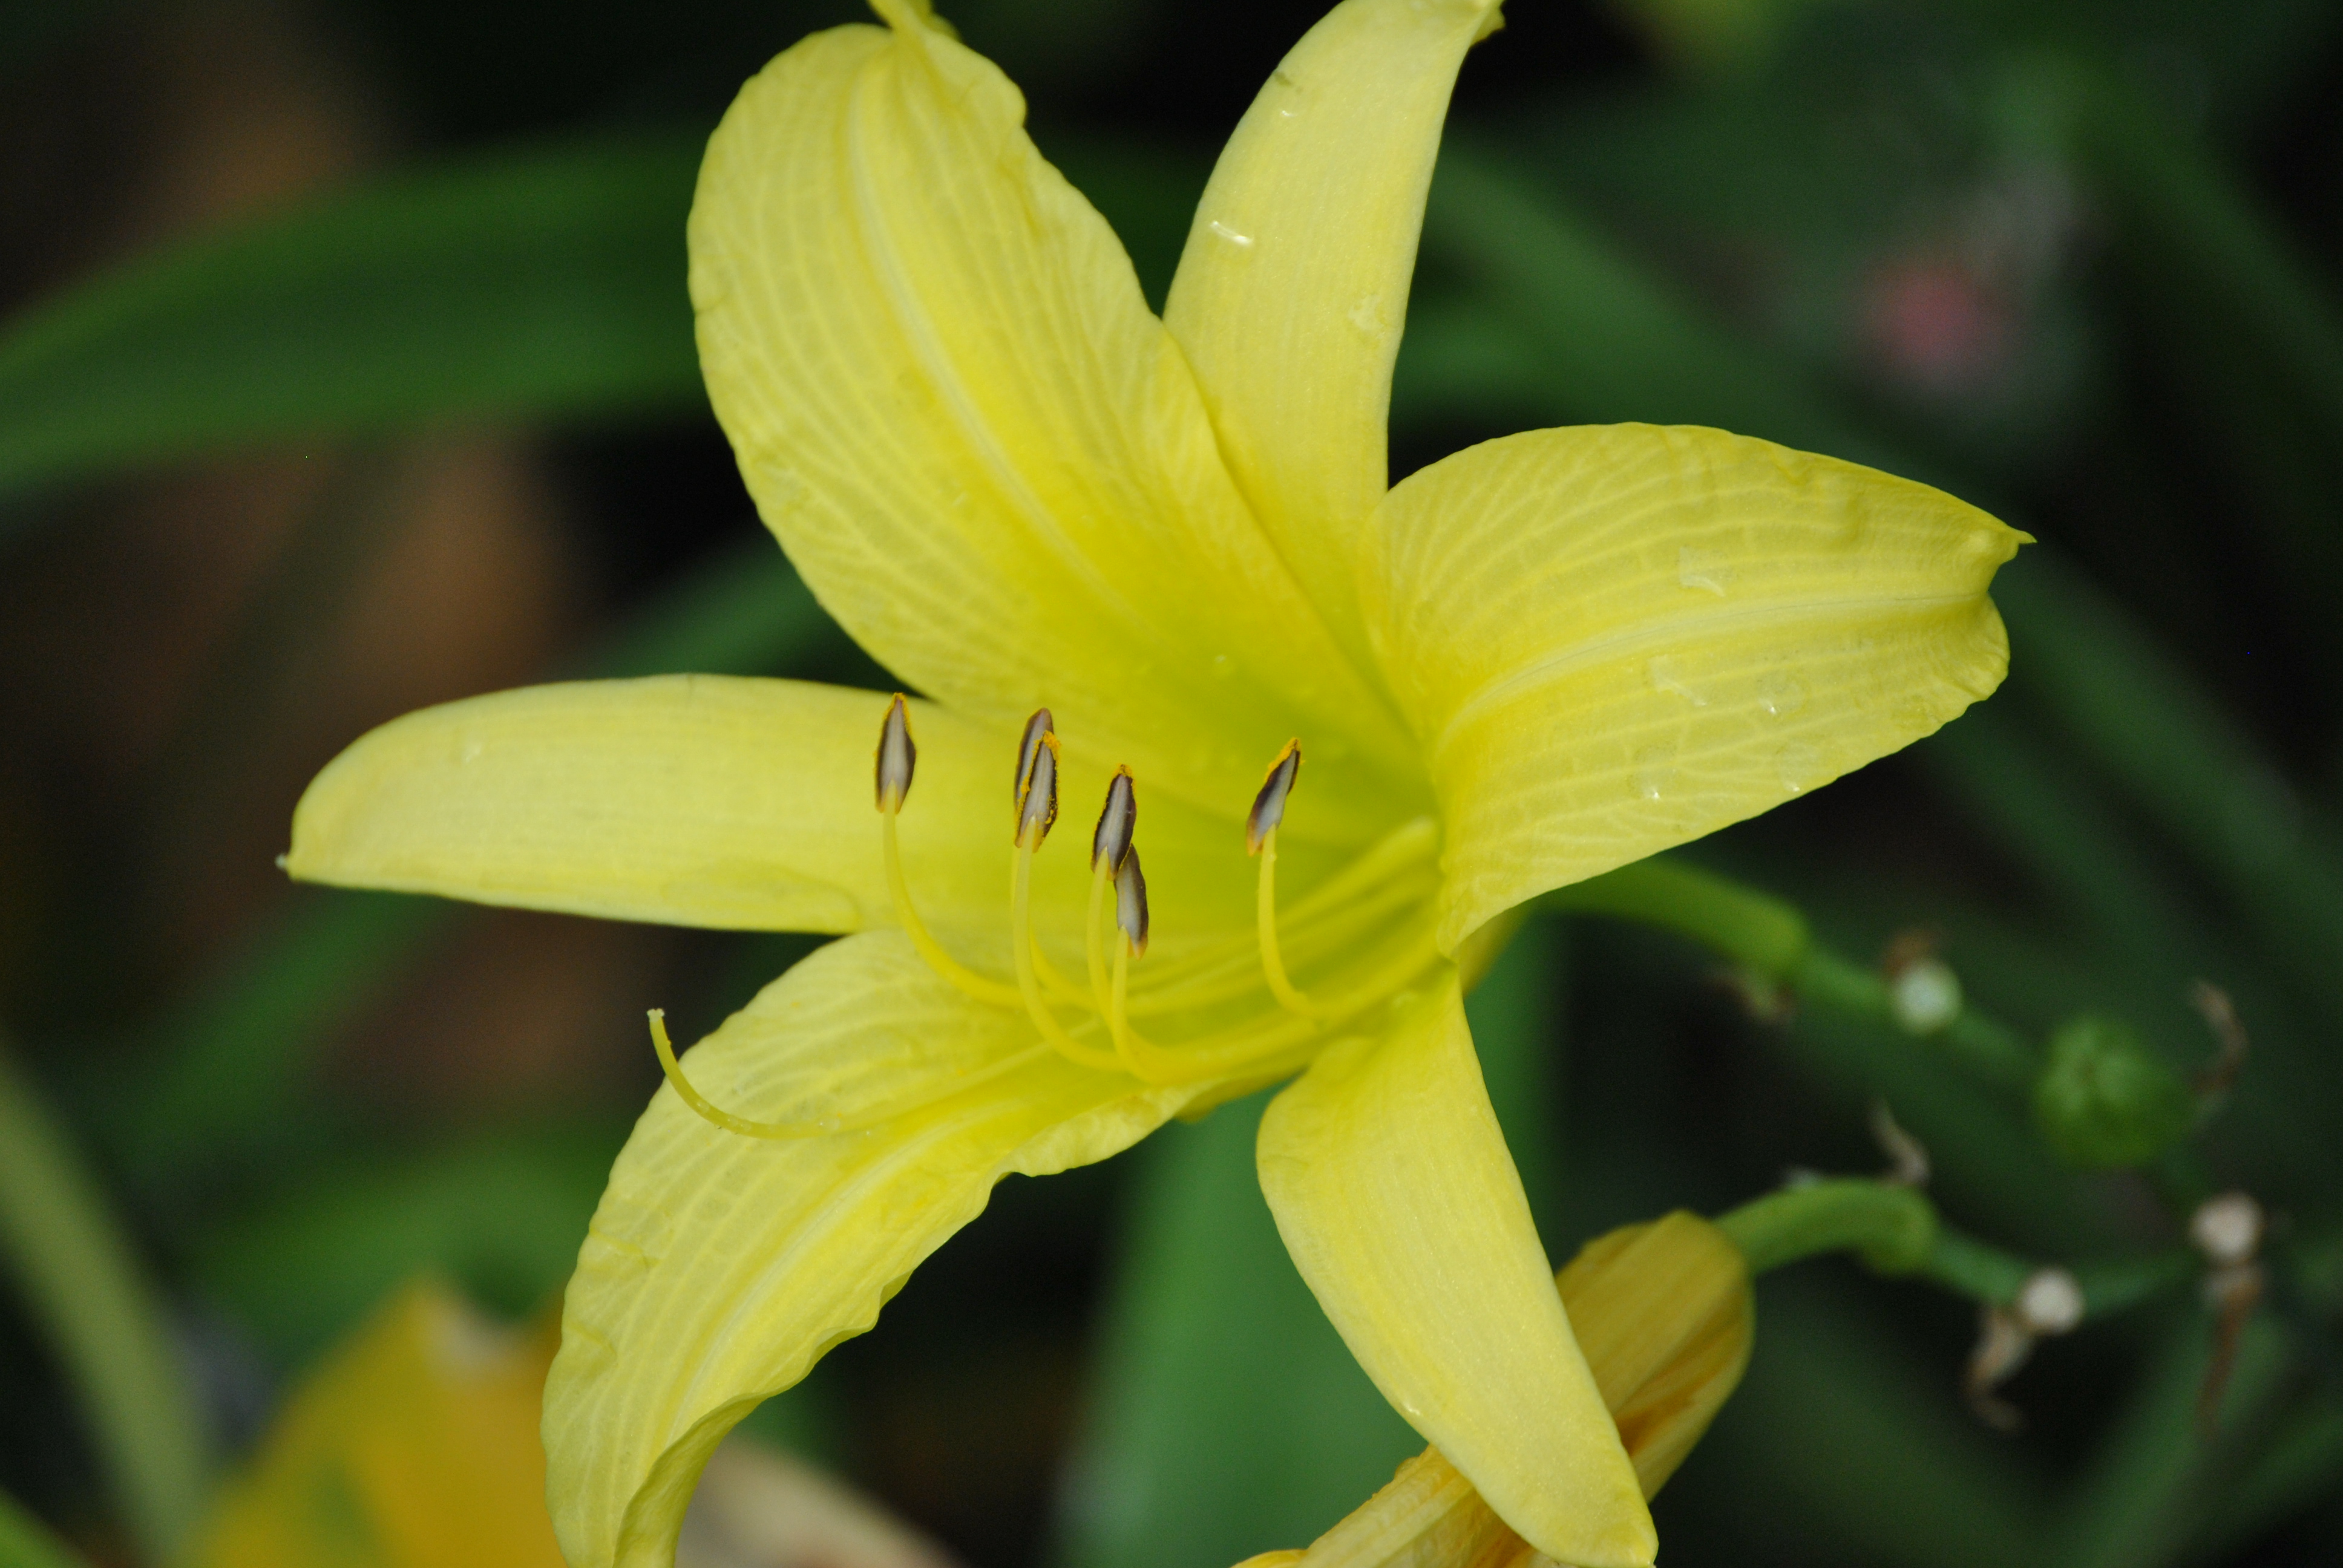 File:Bright yellow flower in the shade.jpg - Wikimedia Commons